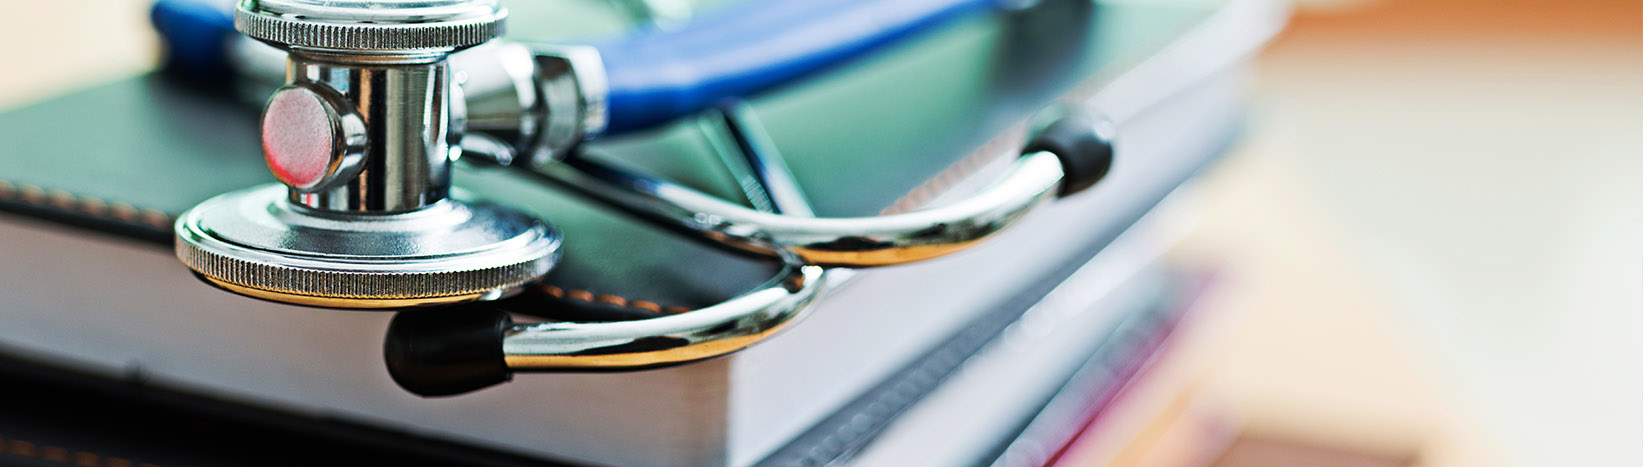 Medical stethoscope on top of books